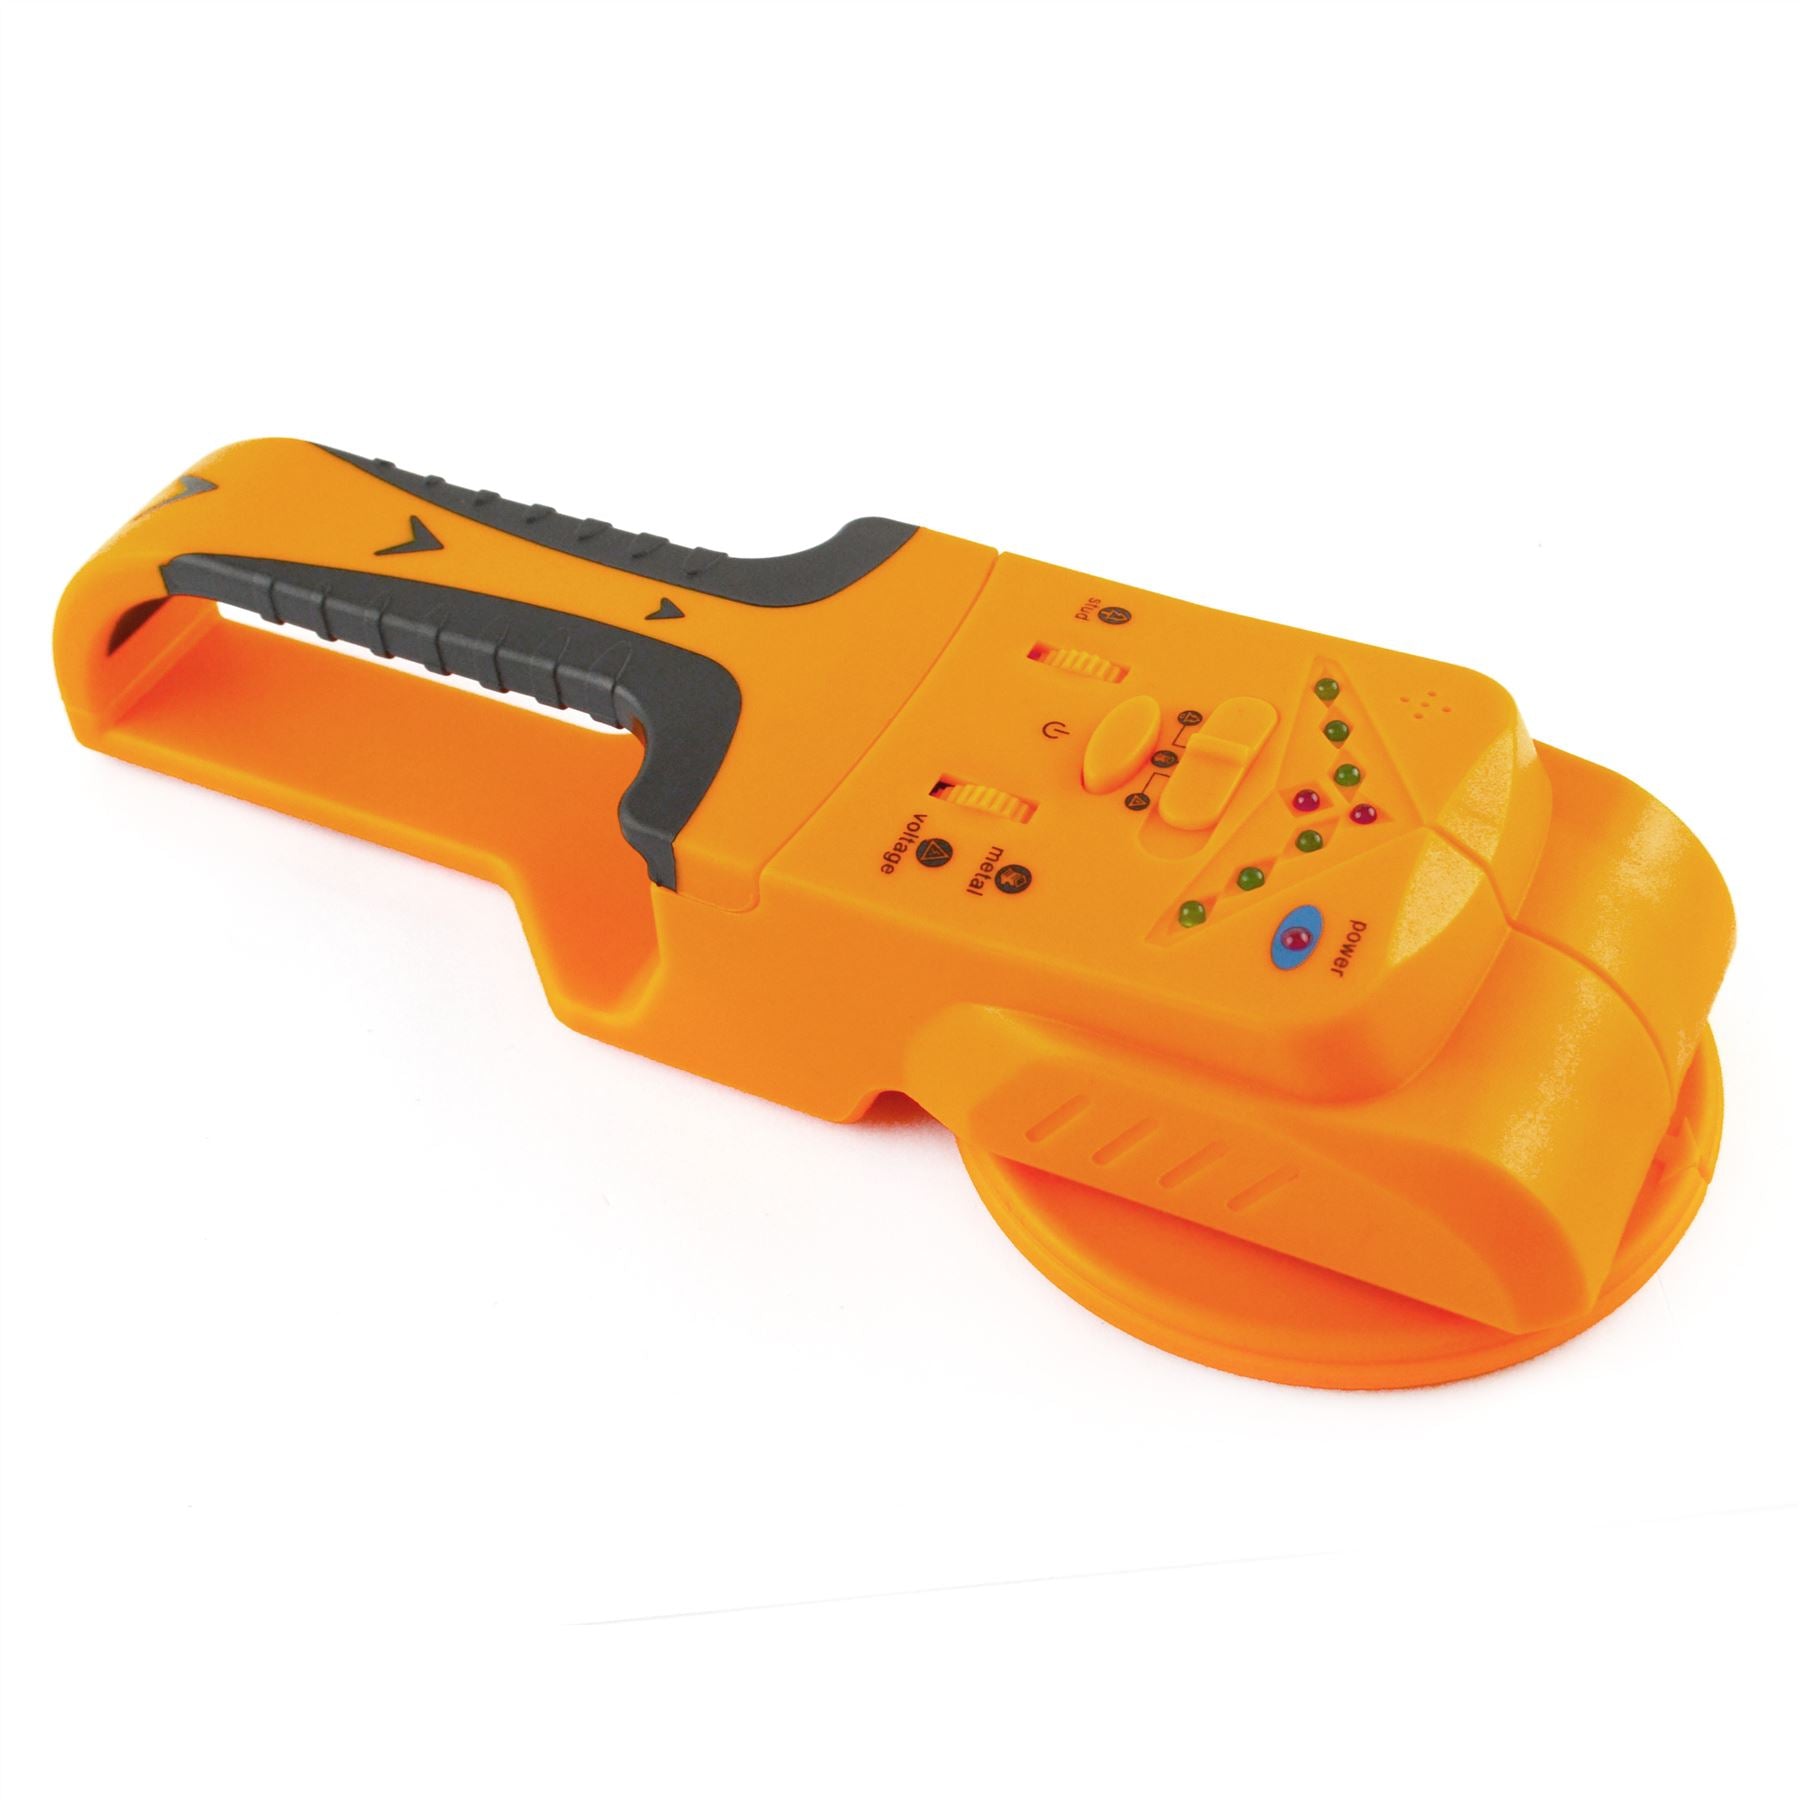 3 In 1 Detector Detects Studs Joists Live Wires Metal Objects Cables Pipes TE912